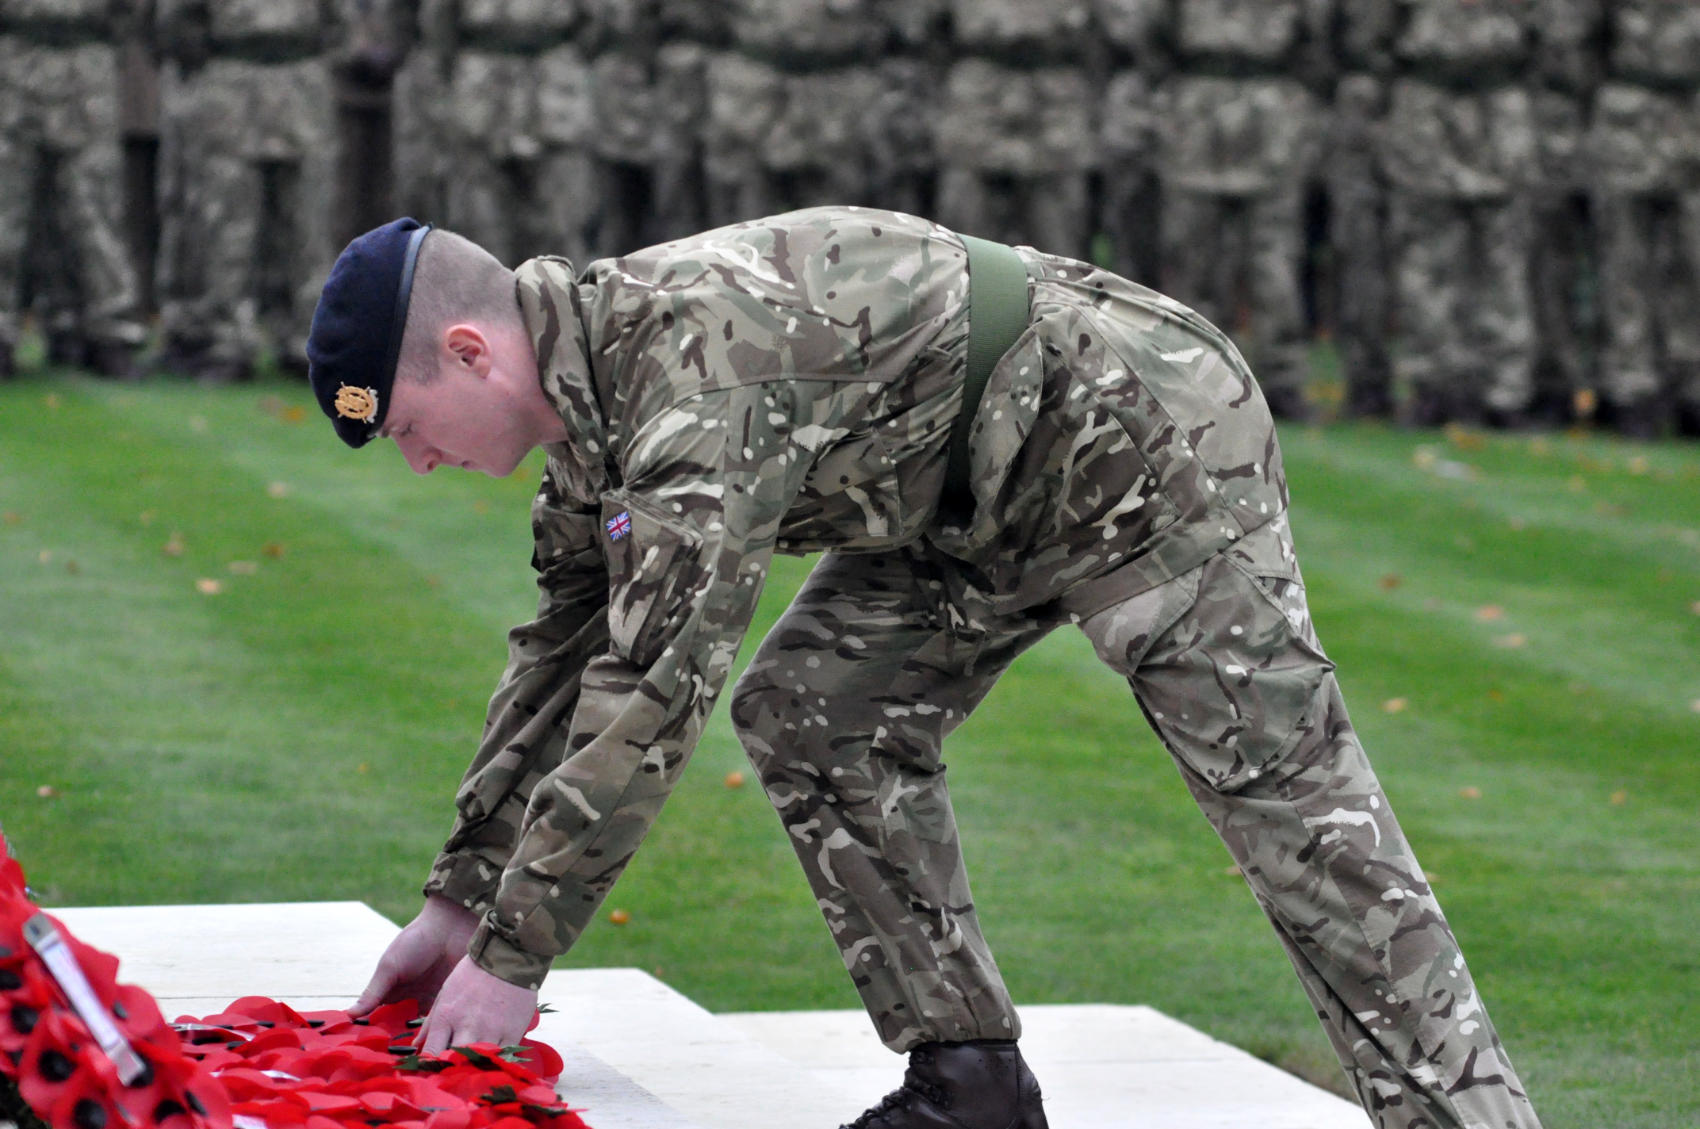 The Remembrance Service at Stonefall